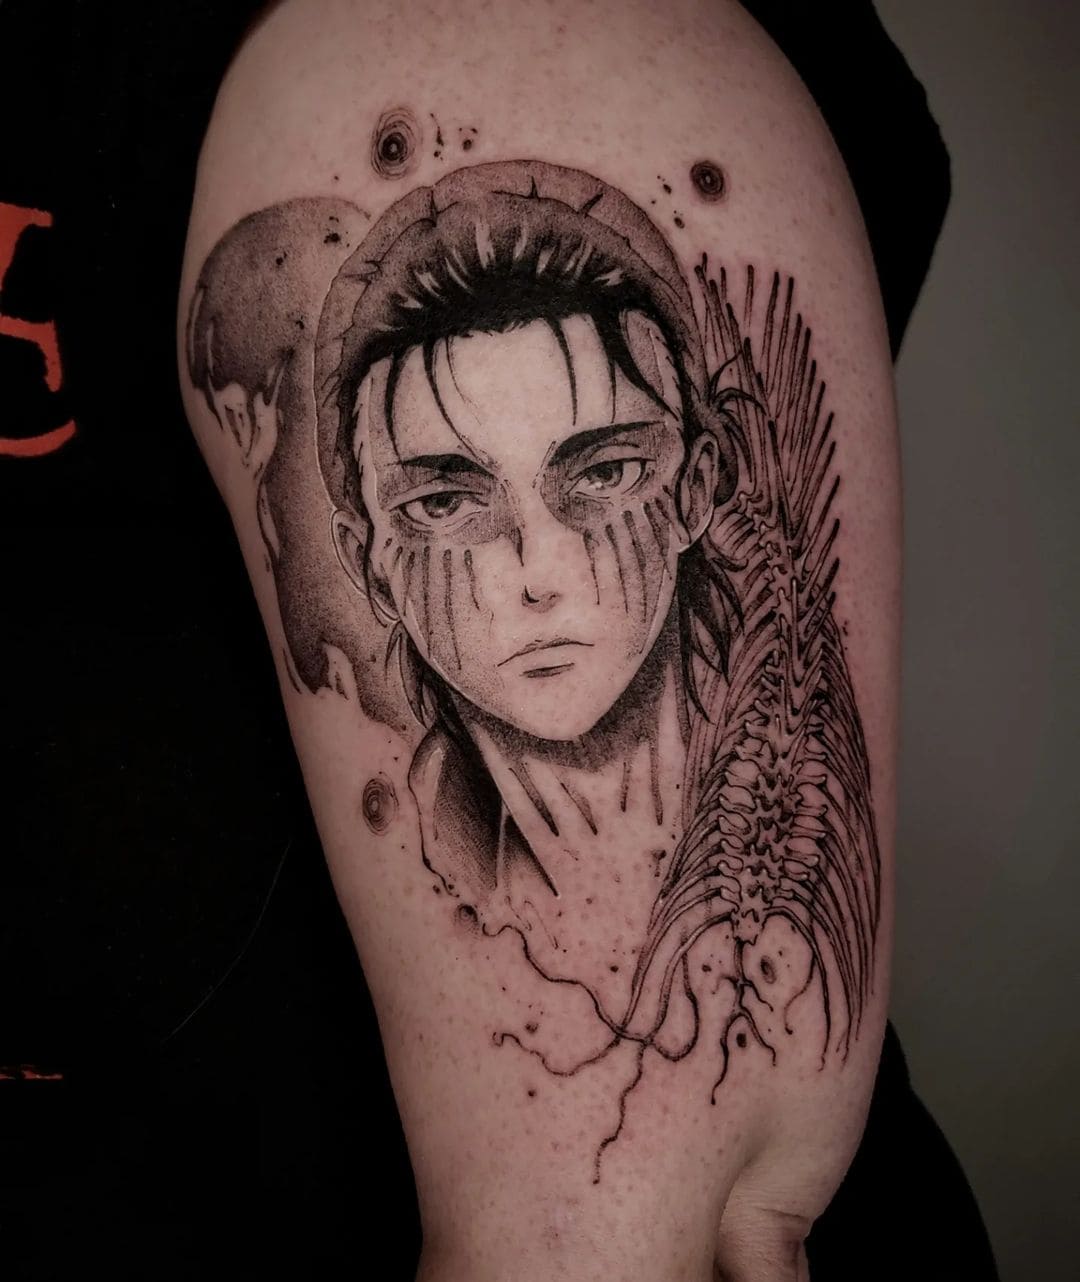 Attack on Titan Tattoos: A Tribute to the Titans and Humanity